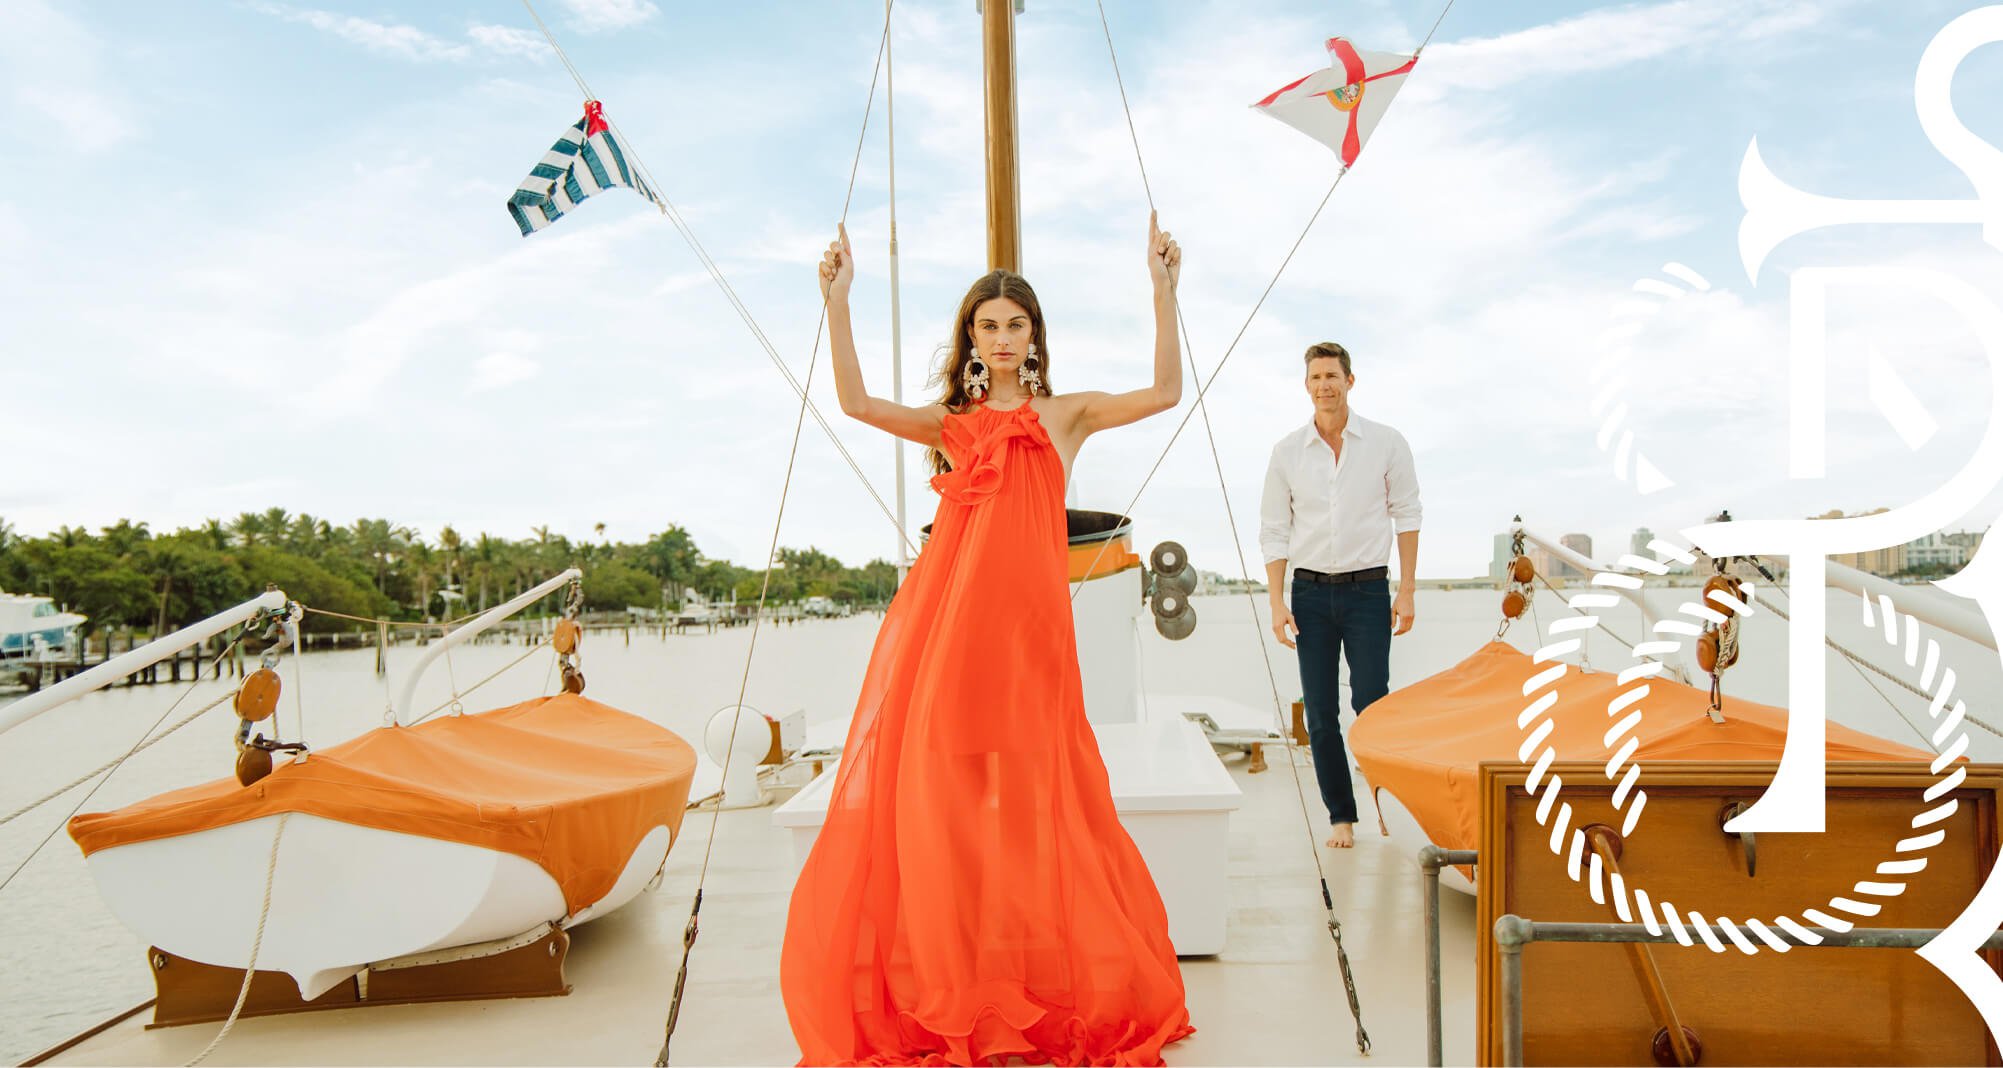 Jacober Creative Brand Identity for The Town of Palm Beach Marina. Models on top of the boat and flags.